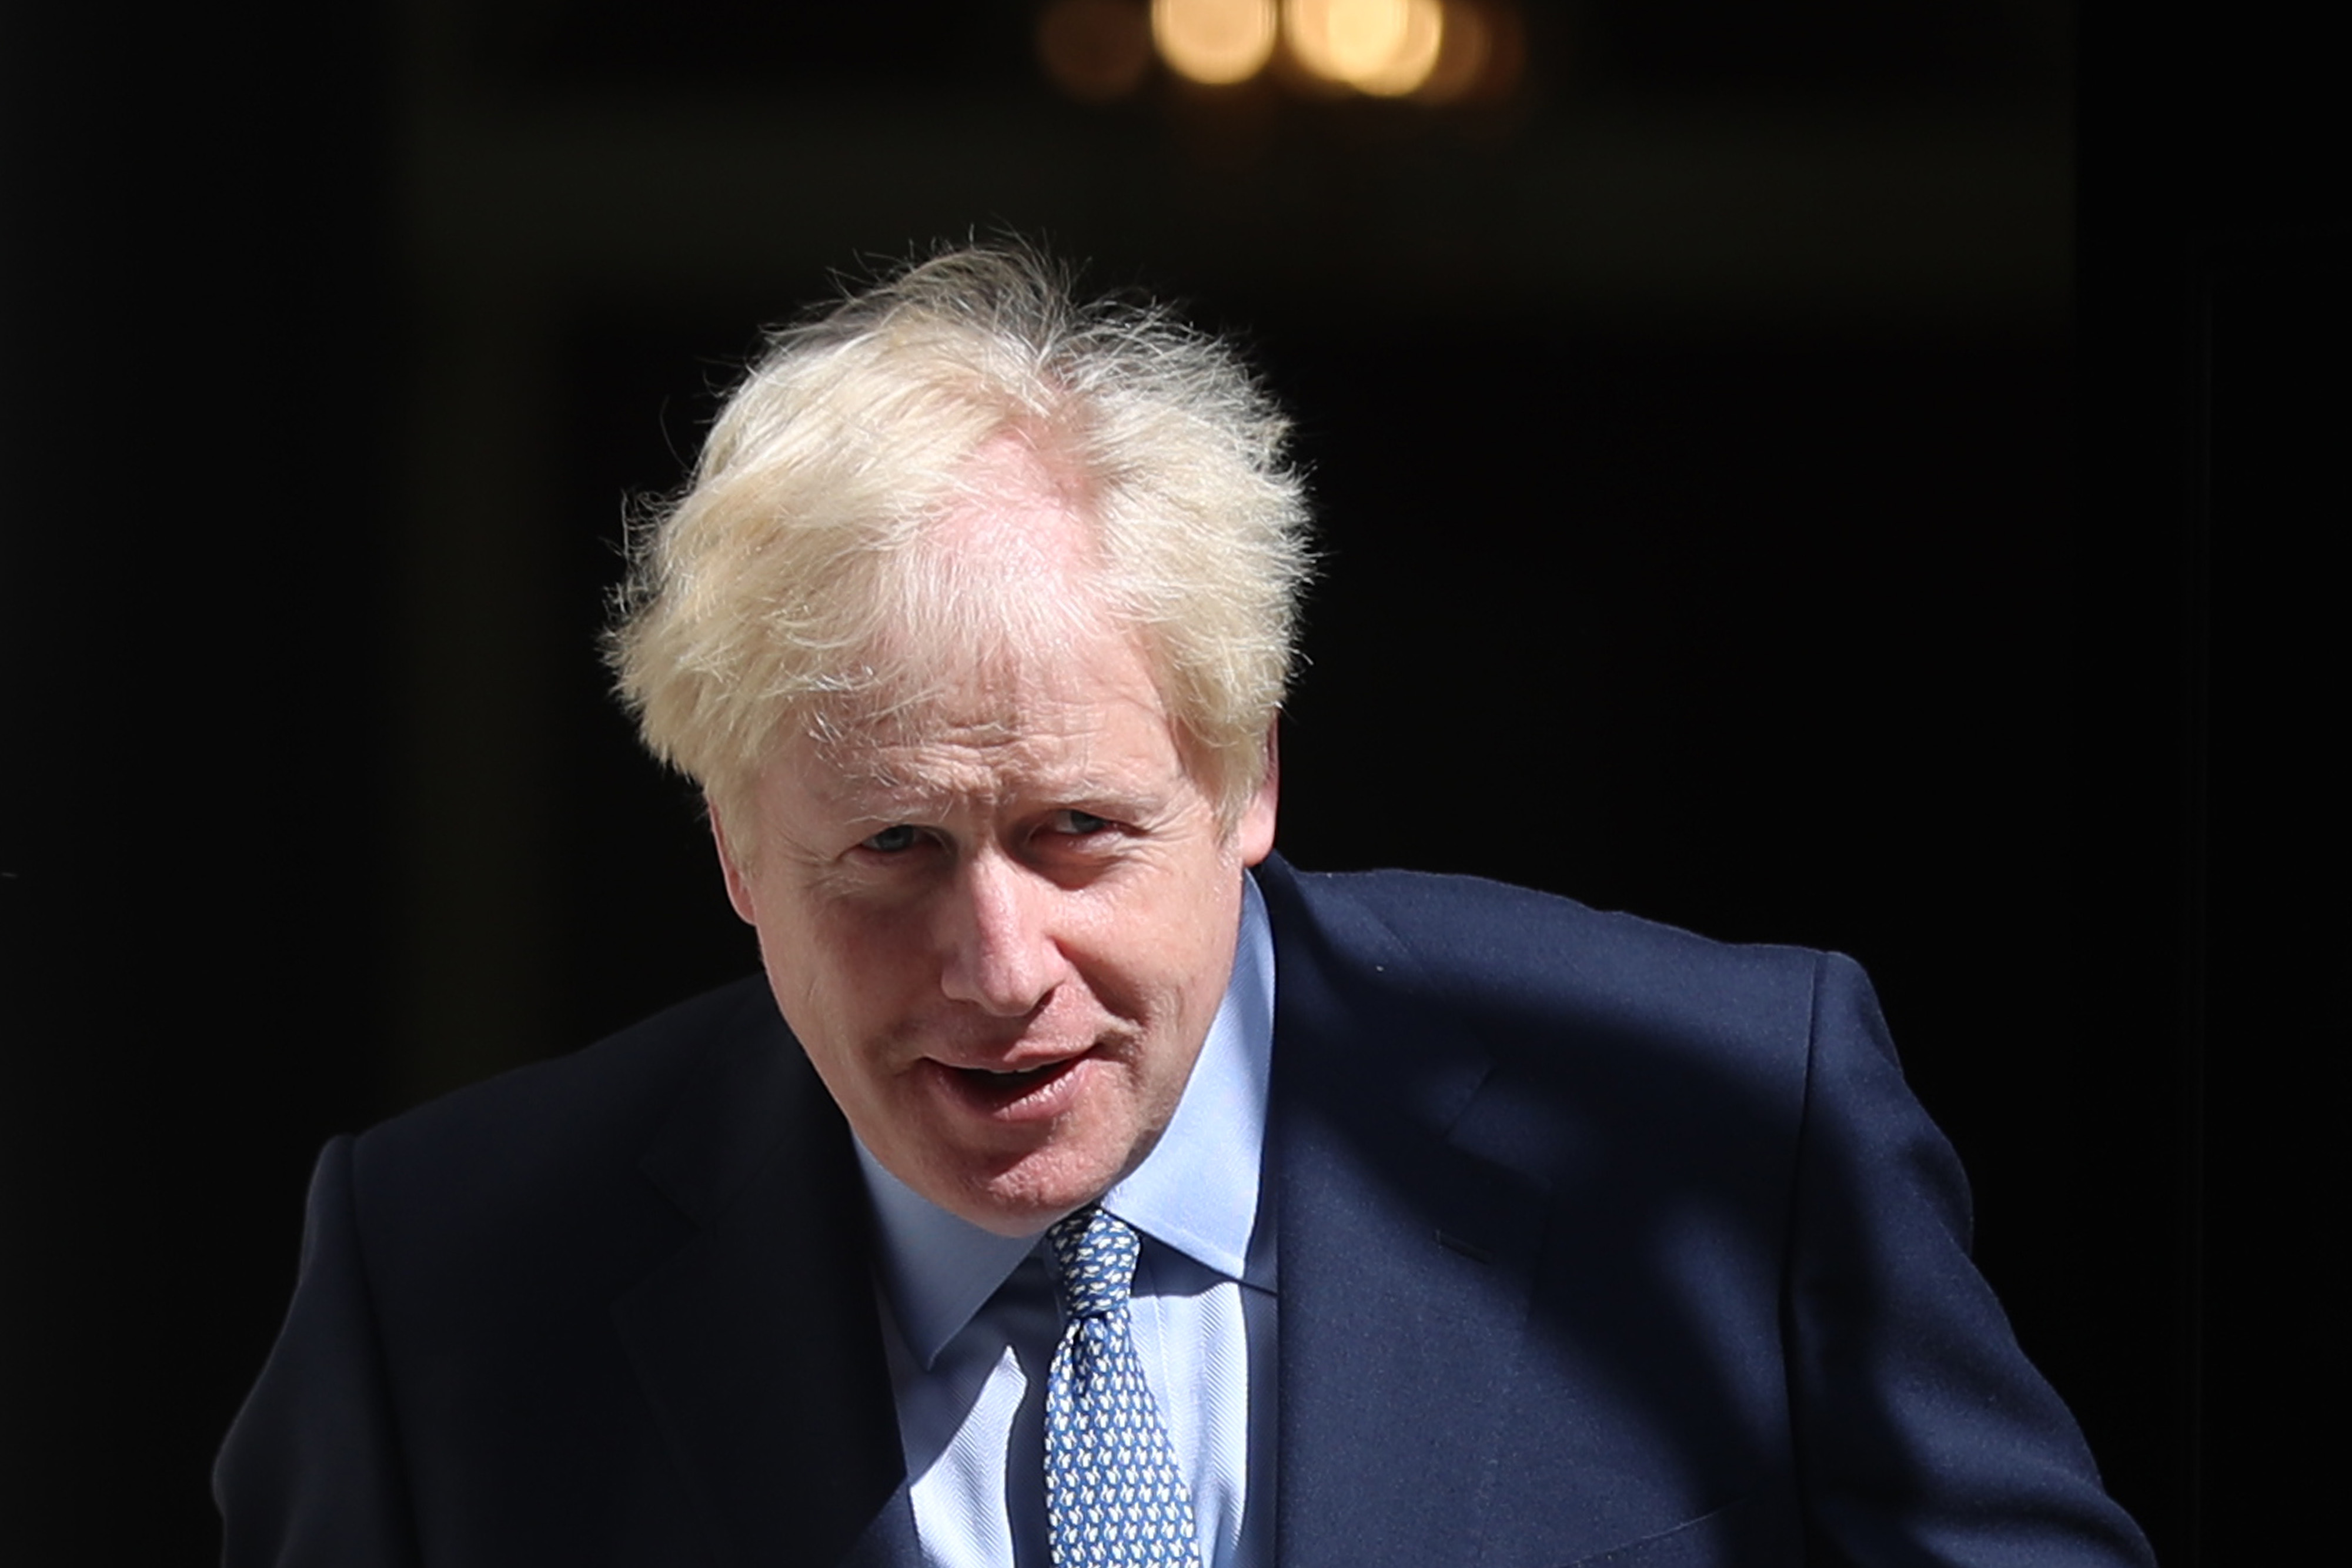 Boris Johnson, U.K. prime minister, prepares to welcome Juri Ratas, Estonia&#039;s prime minister, not pictured, ahead of their meeting at number 10 Downing Street in London, U.K., on Tuesday, Aug